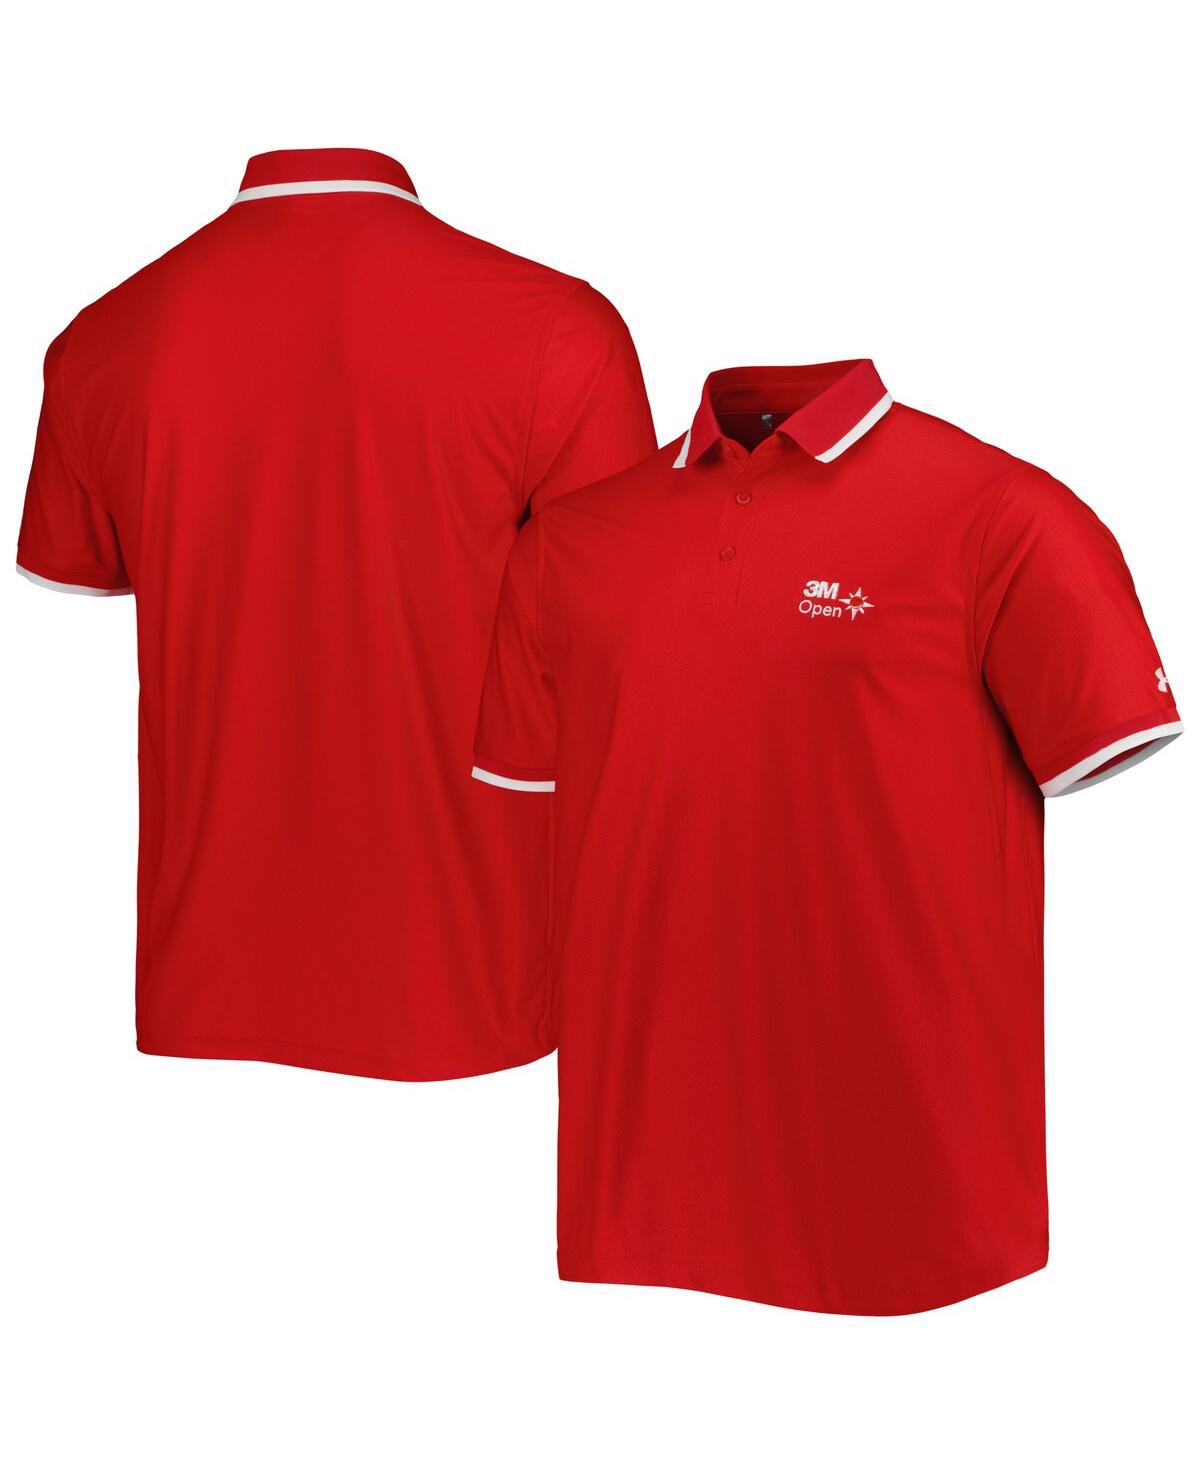 Shop Under Armour Men's  Red 3m Open Playoff 2.0 Pique Performance Polo Shirt